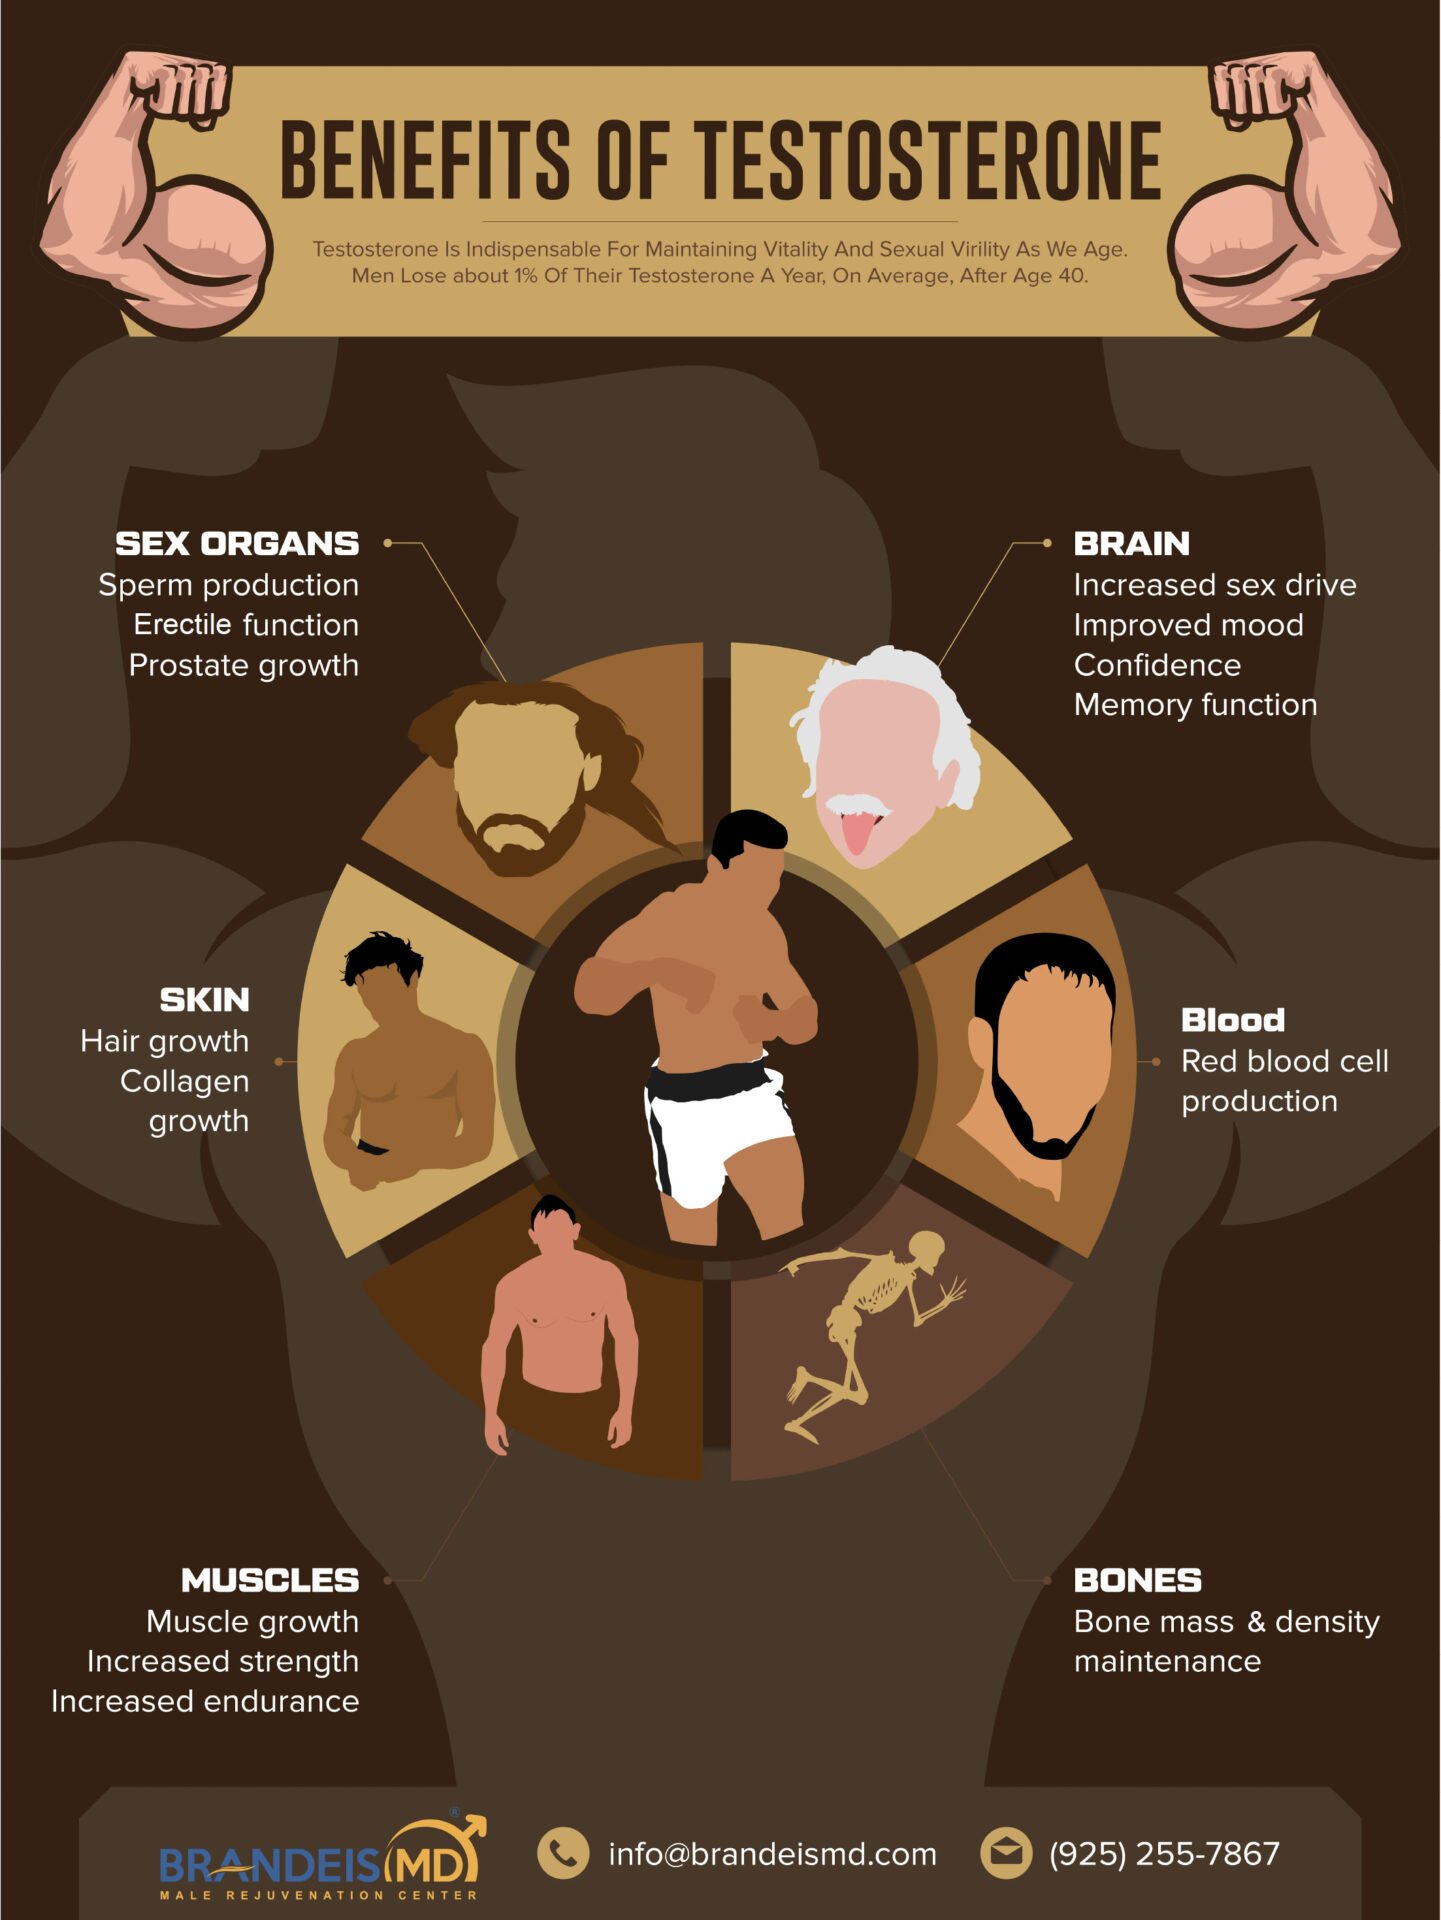 Benefits Of Testosterone - DO NOT CHANGE THIS GRAPHIC - INCLUDED ONLY FOR ORGANIZATION PURPOSES